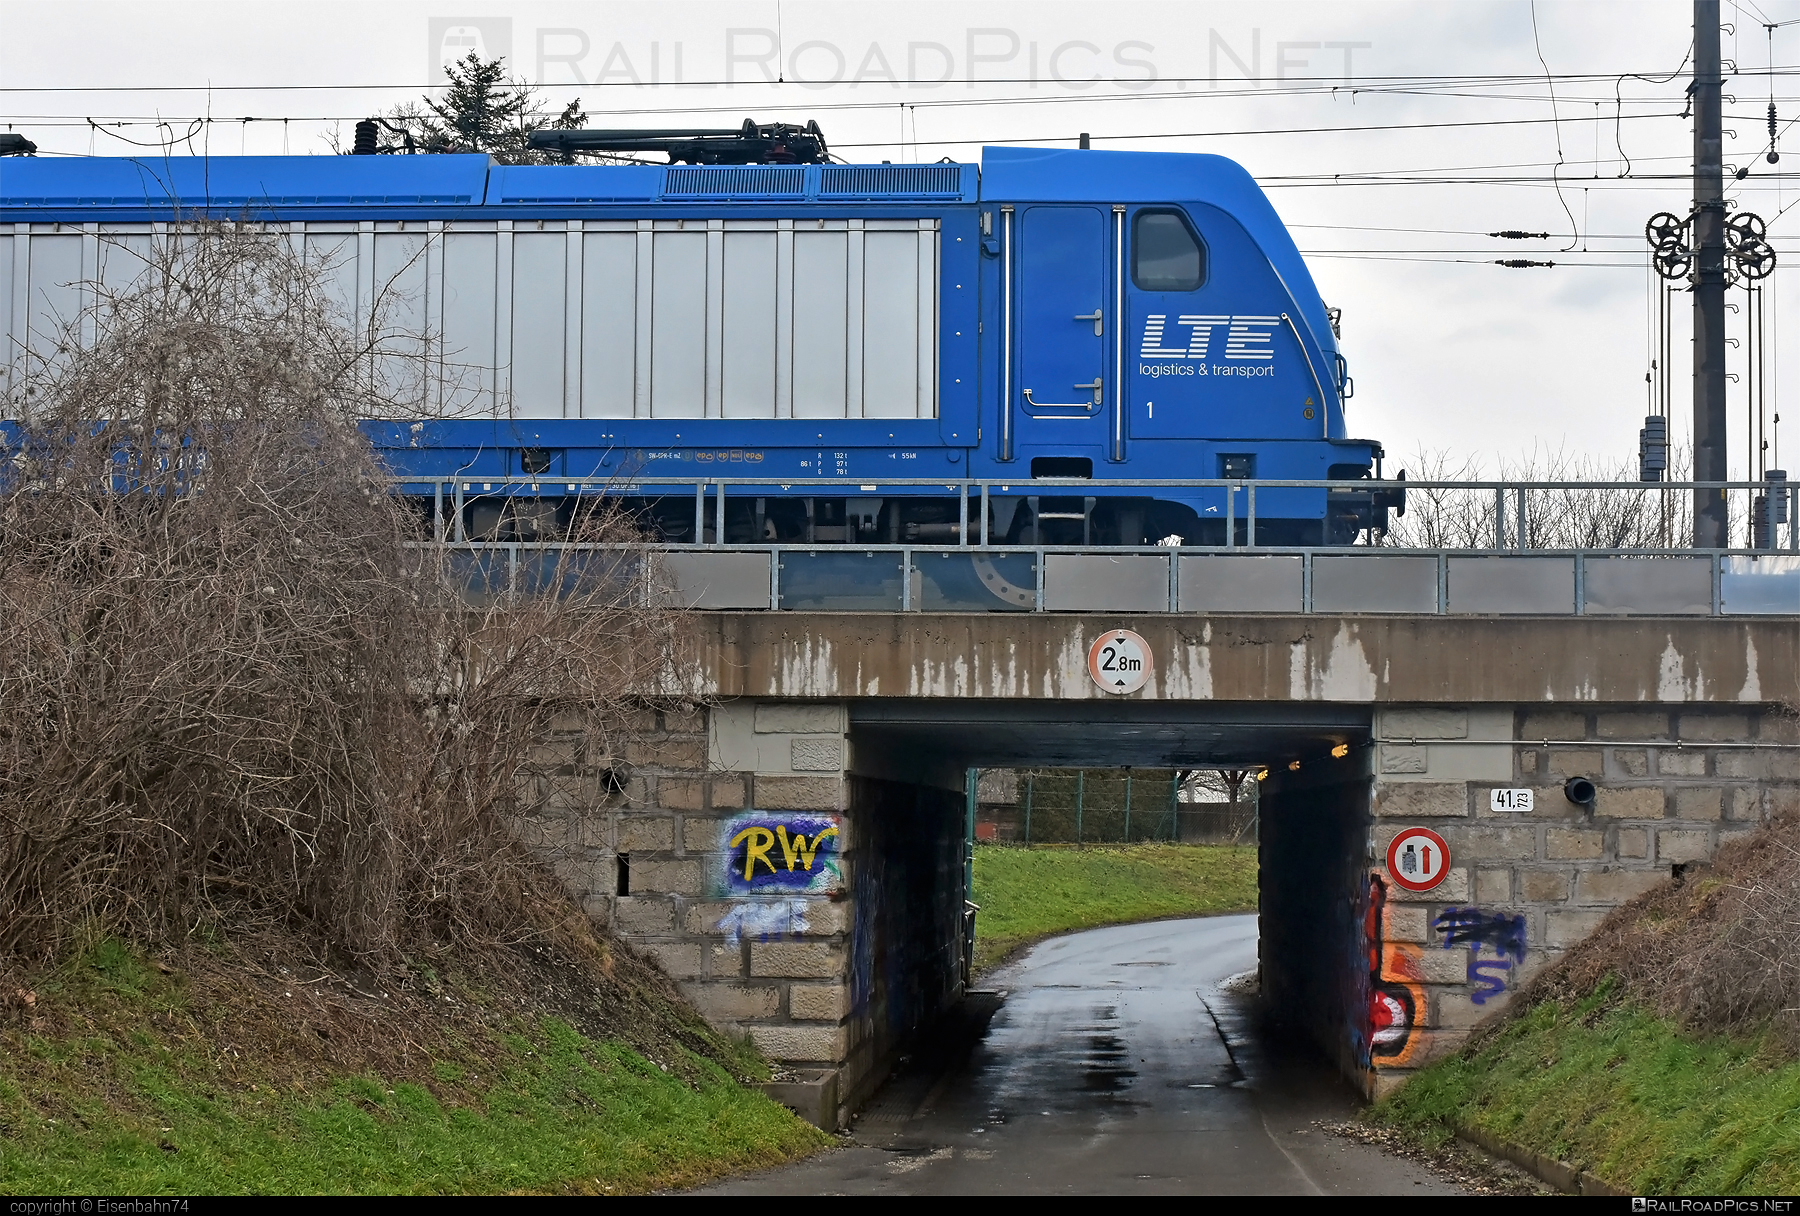 Bombardier TRAXX F160 AC3 - 187 930-3 operated by LTE Logistik und Transport GmbH #bombardier #bombardiertraxx #bridge #lte #ltelogistikundtransport #ltelogistikundtransportgmbh #traxx #traxxf160 #traxxf160ac #traxxf160ac3